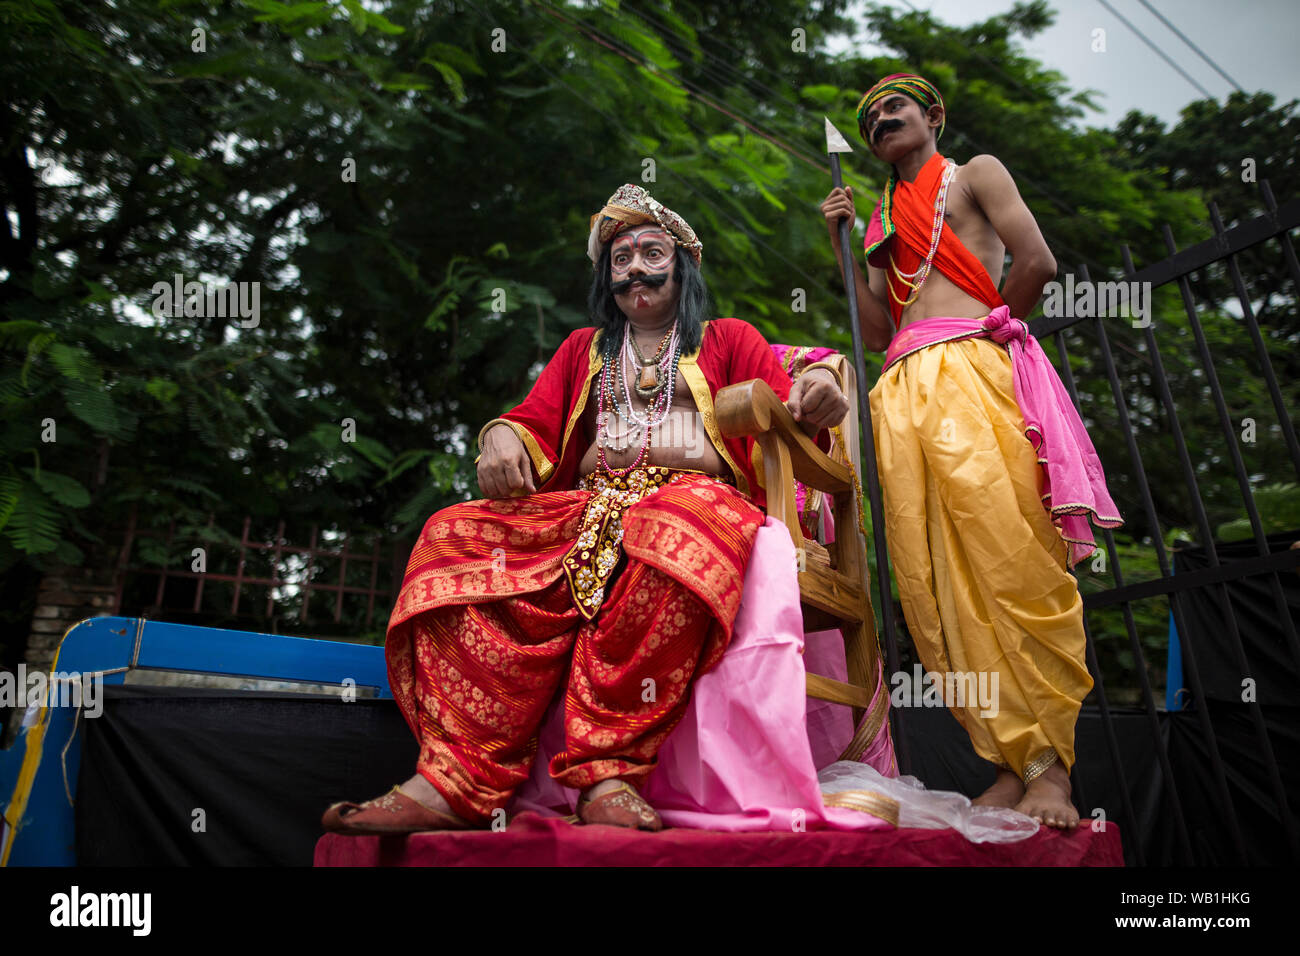 DHAKA, BANGLADESH - AUGUST 23 : Hindu devotees parade as they take part in the celebrations of Janmashtami, a festival marking the birth of Hindu deit Stock Photo